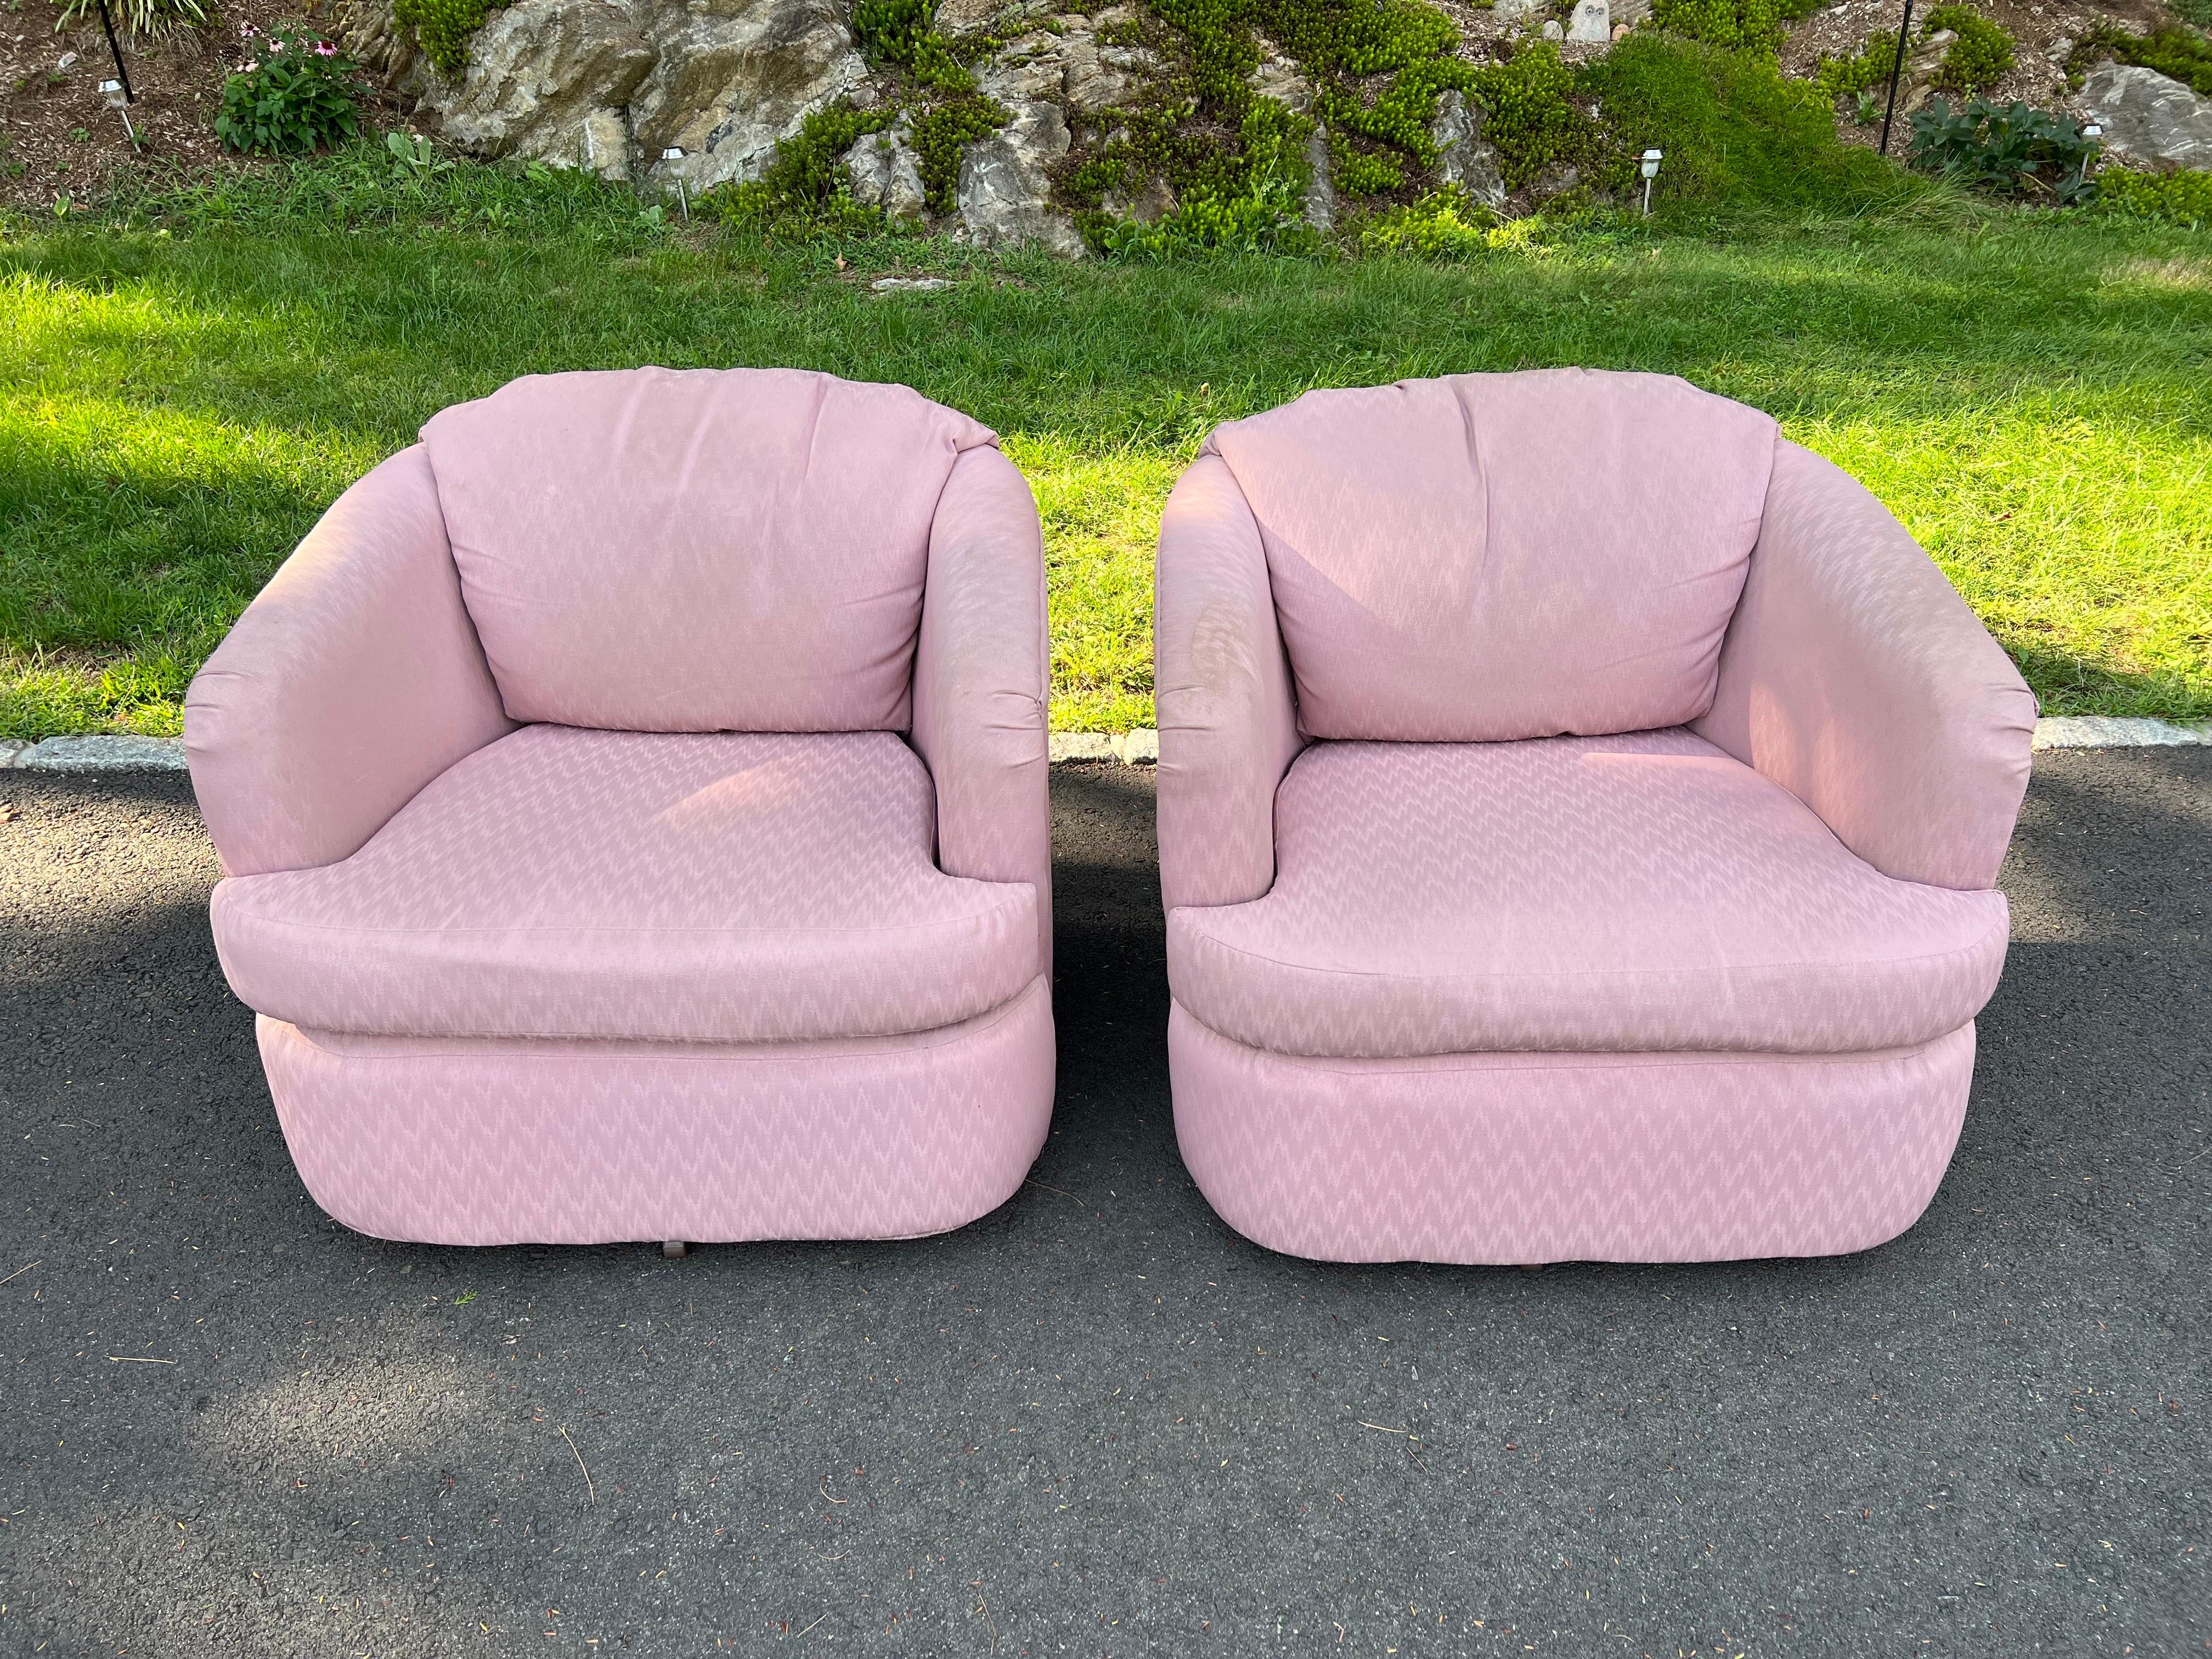 Pair of dusty rose swivel chairs. Fabulous golden girls style. Wooden construction. Nice wide and round shape with a low profile. Classic 1980's-90's Post Modern feel.